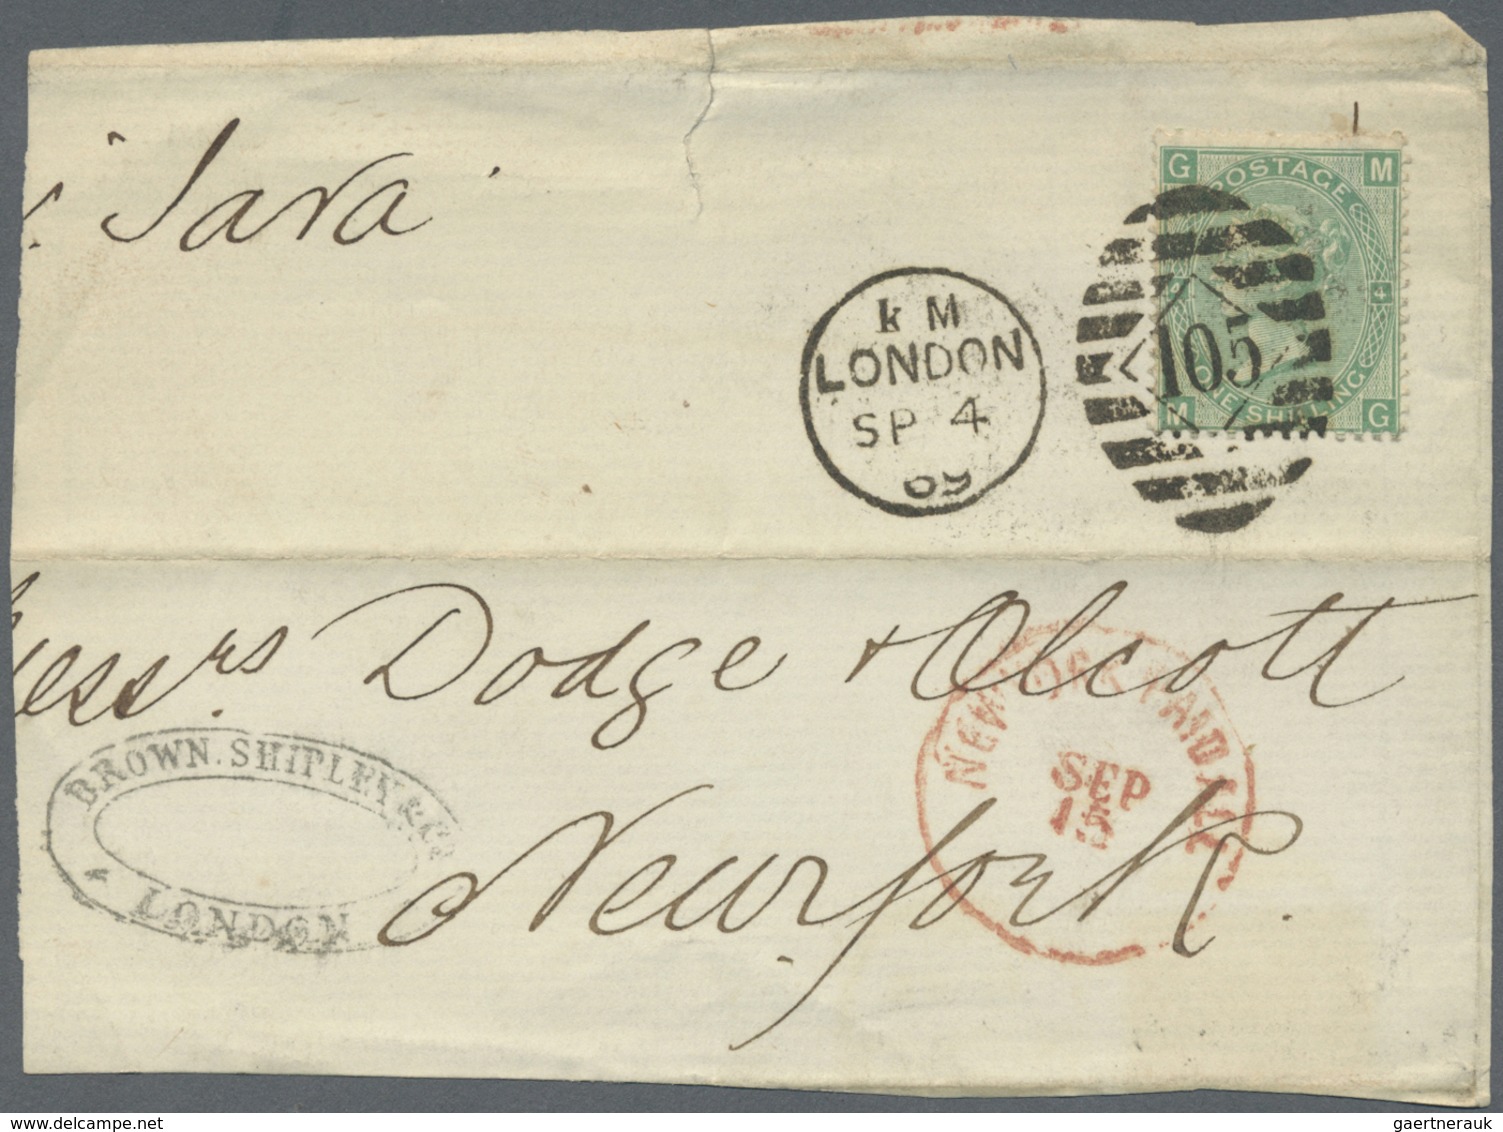 Brfst Großbritannien: 1865/1869, assortment of 74 fronts/large fragments each franked with 84 copies 1s. g